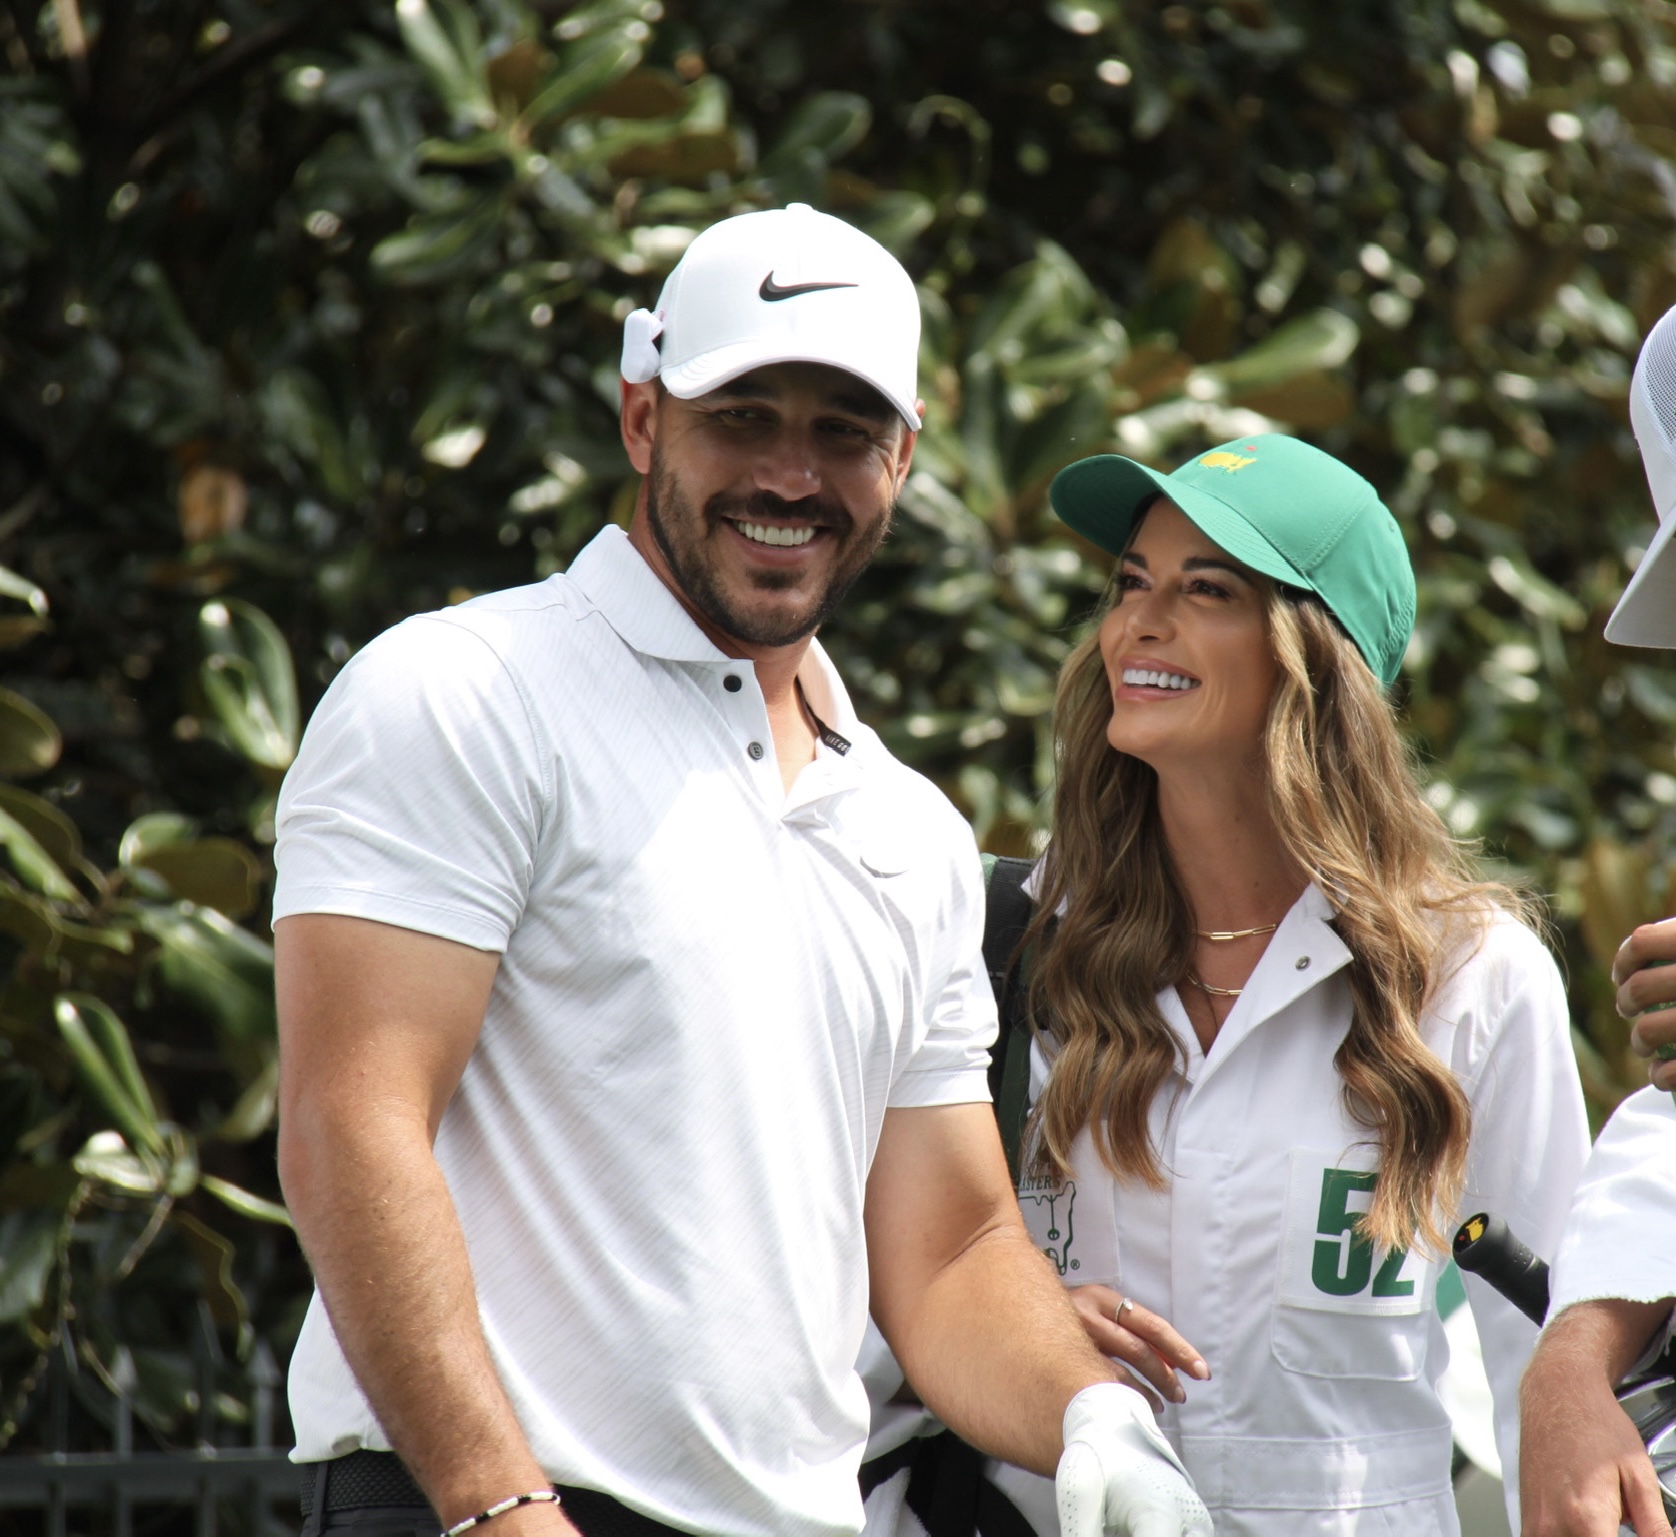 Actress Jena Sims found love through The Masters and Instagram direct